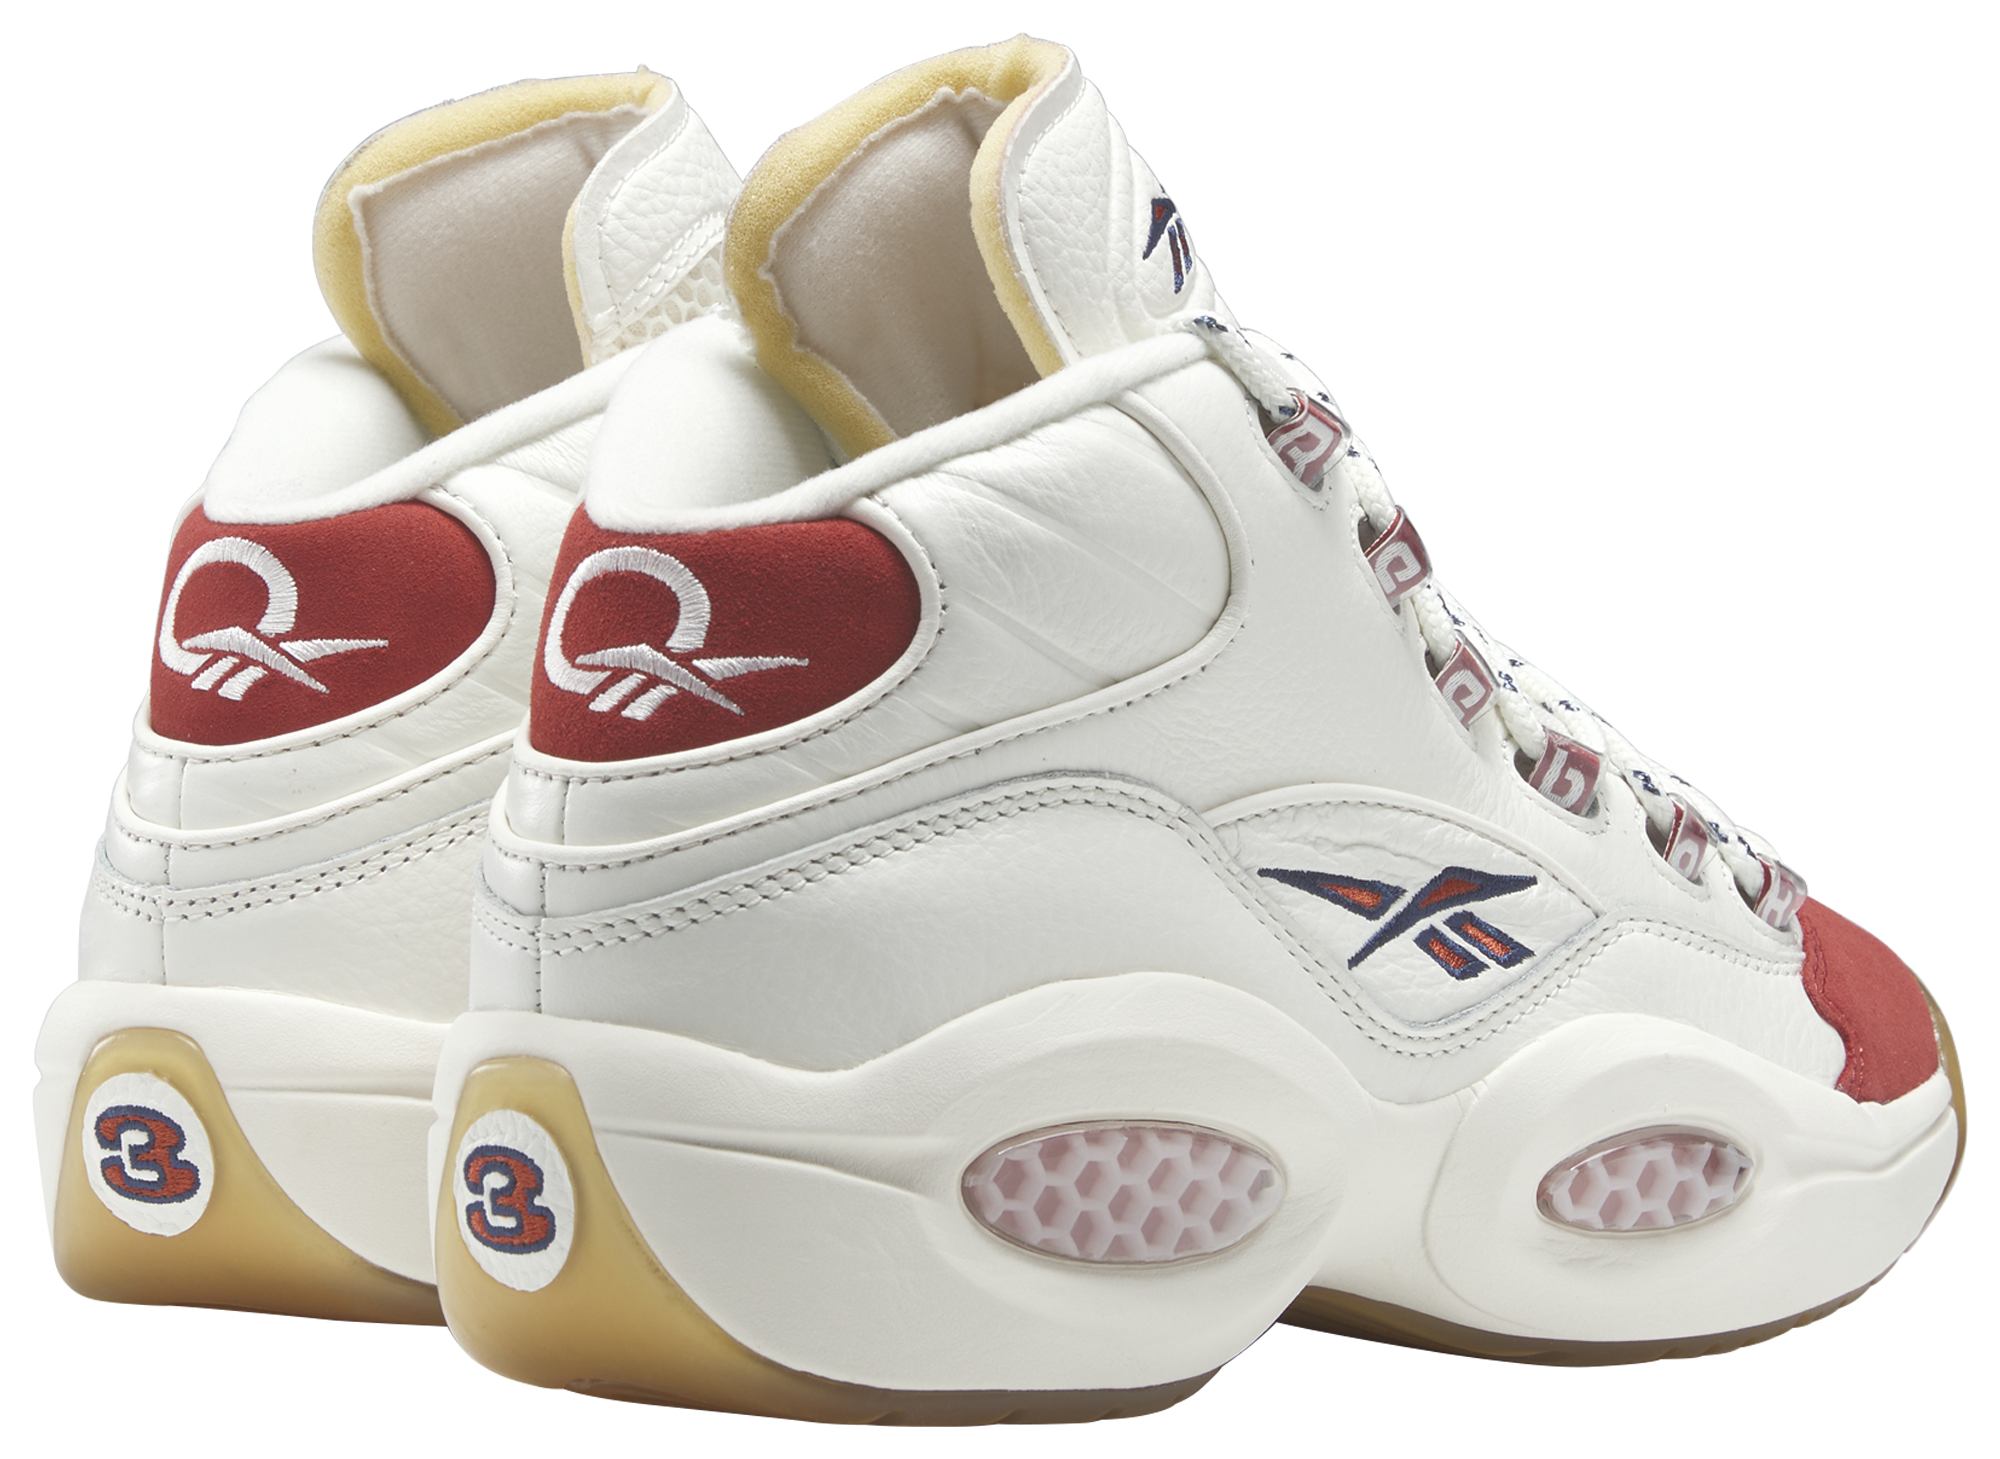 Infrastructure-intelligenceShops Marketplace, The SAHS Reebok Question Mid  will be